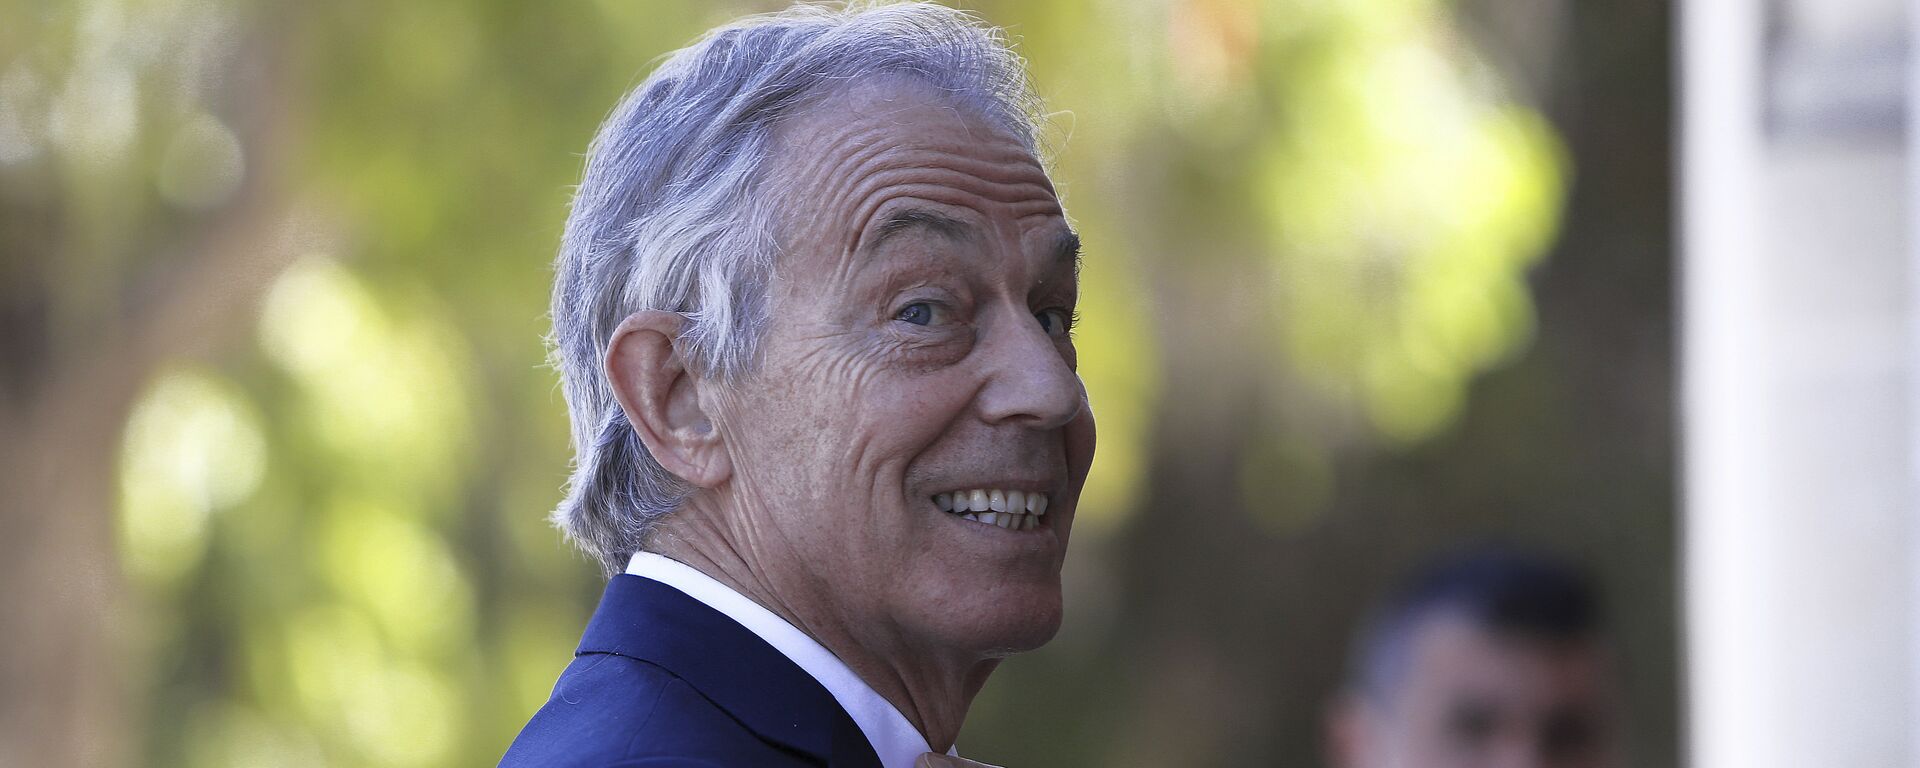 Former British Prime Minister Tony Blair arrives at the presidential palace for a meeting with Cyprus' President Nicos Anastasiades in capital Nicosia, Cyprus, Wednesday, April 4, 2018. - Sputnik International, 1920, 10.02.2021